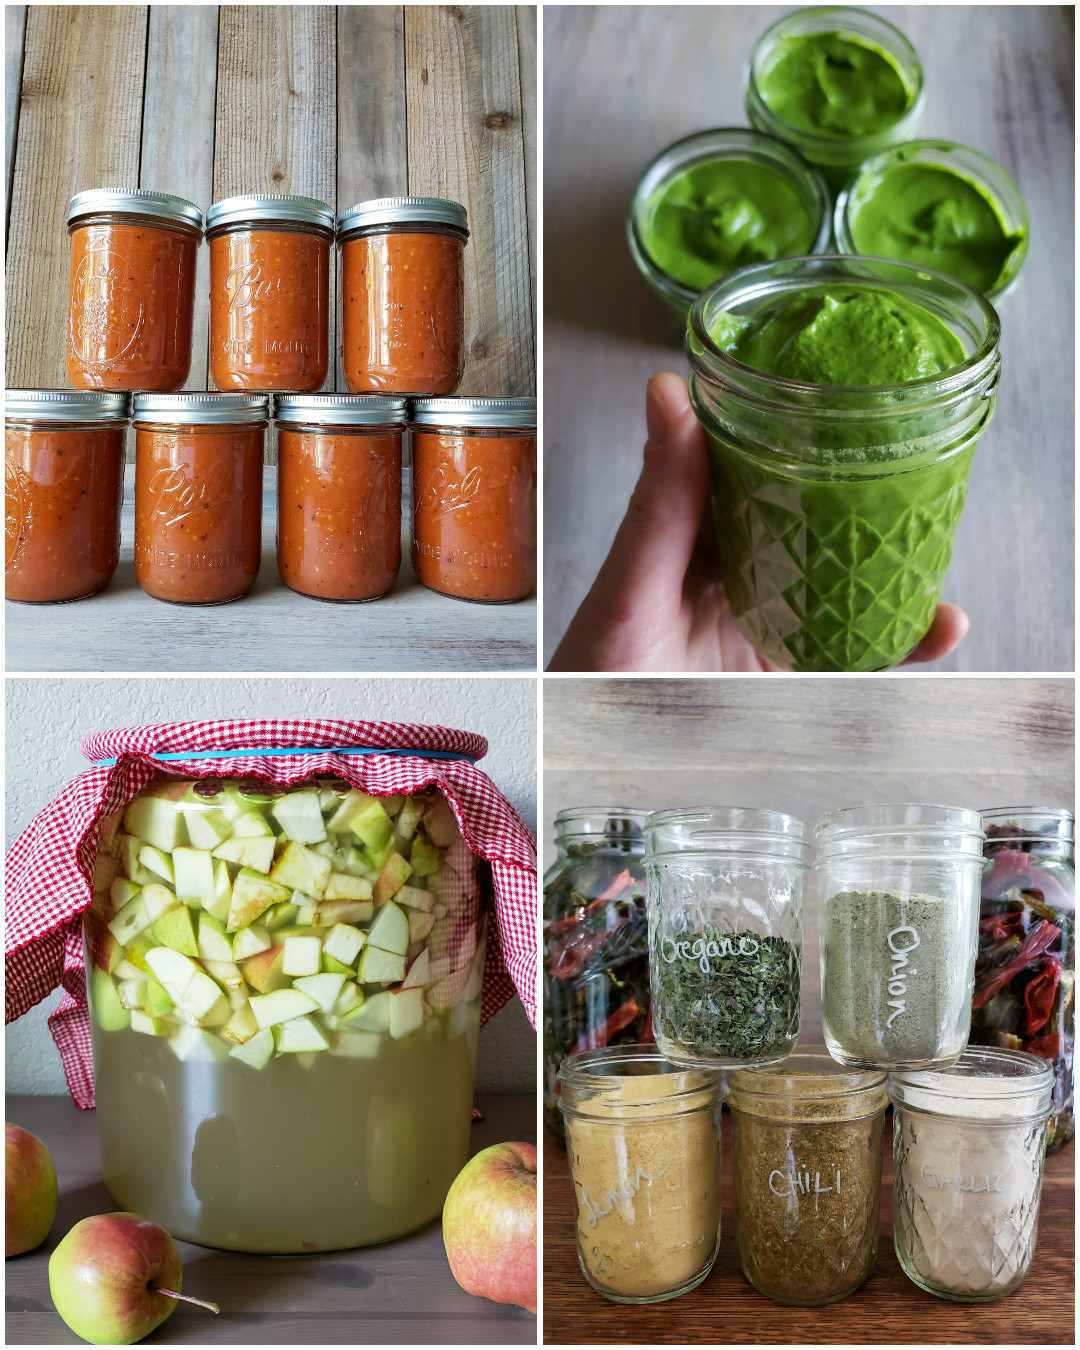 A four part image collage, the first image shows seven pint jars of roasted tomato sauce lined up and ready to freeze for preservation. The second image shows a hand holding a half pint mason jar full of freshly made pesto sauce while three full jars sit in the background. The third image shows a glass crock full of apple chunks, water, and sugar which is the start of making your own apple cider vinegar and the fourth image shows five pint jars of different seasonings, they are oregano, onion powder, lemon powder, chili powder, and garlic powder. There are two half gallon mason jars in the background full of dried chilis. Preserving your harvest is a key step to start a homestead. 